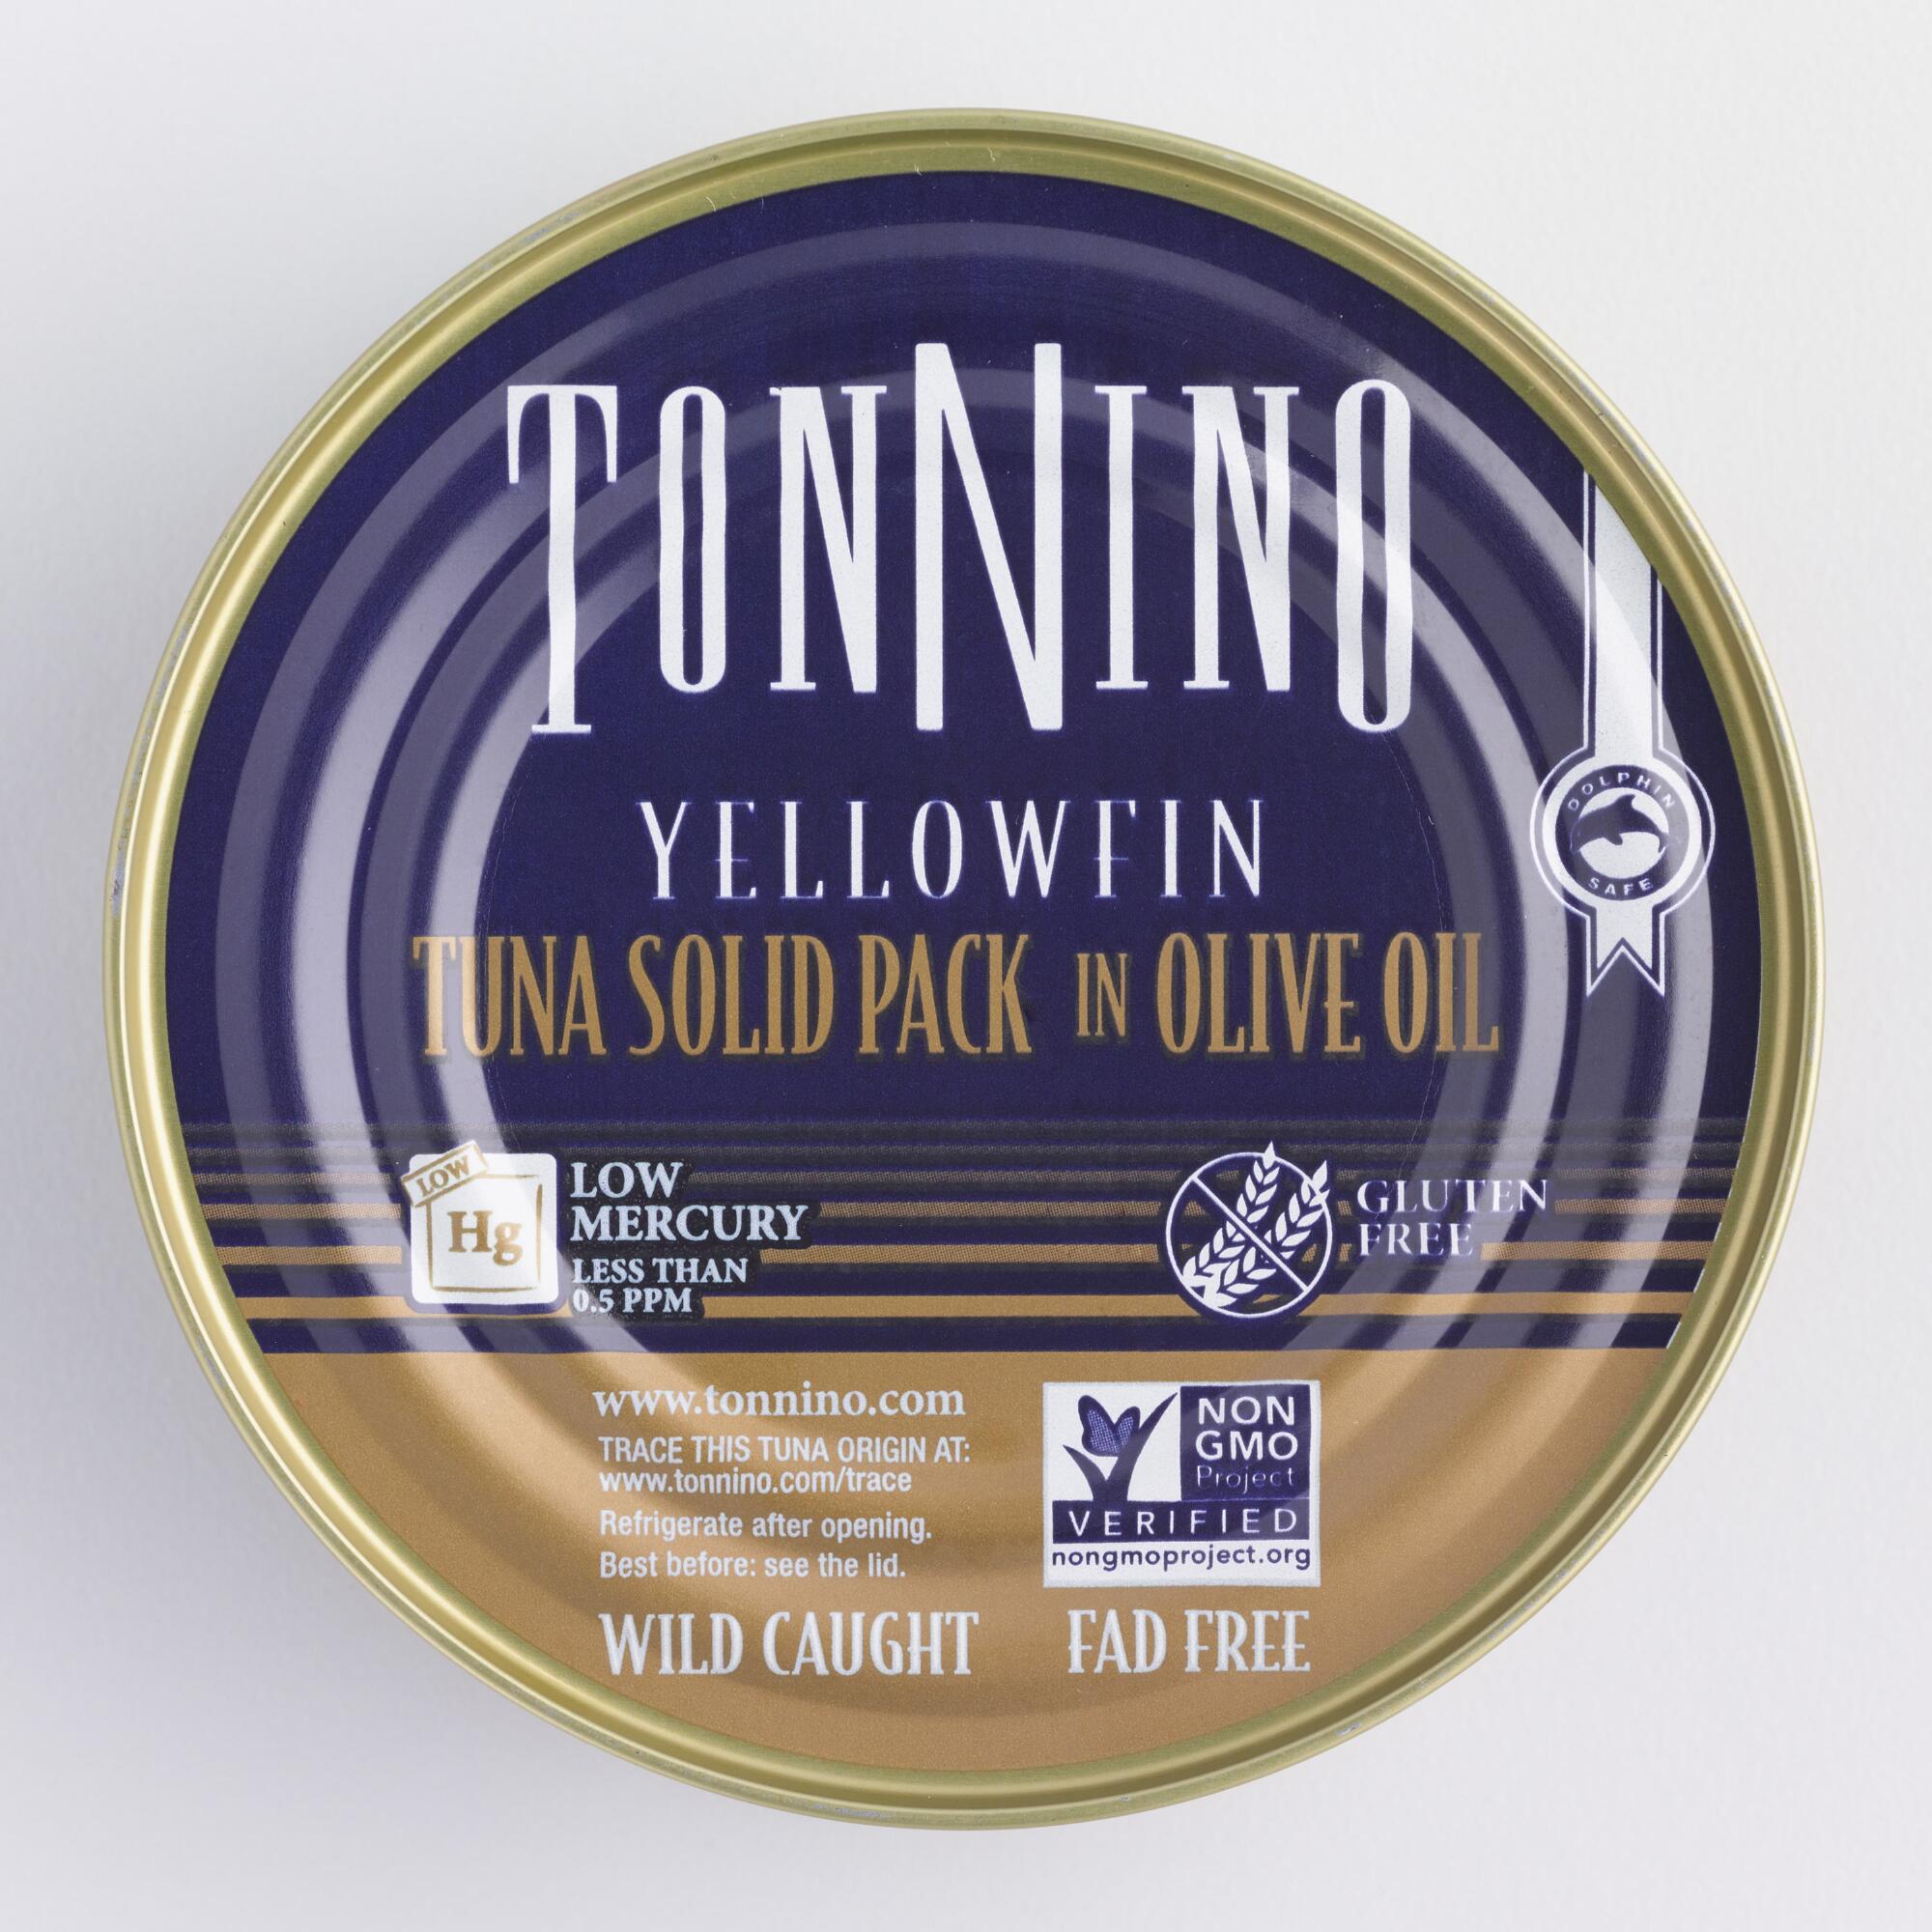 Tonnino Yellowfin Tuna Solid Pack In Olive Oil Set Of 12 by World Market